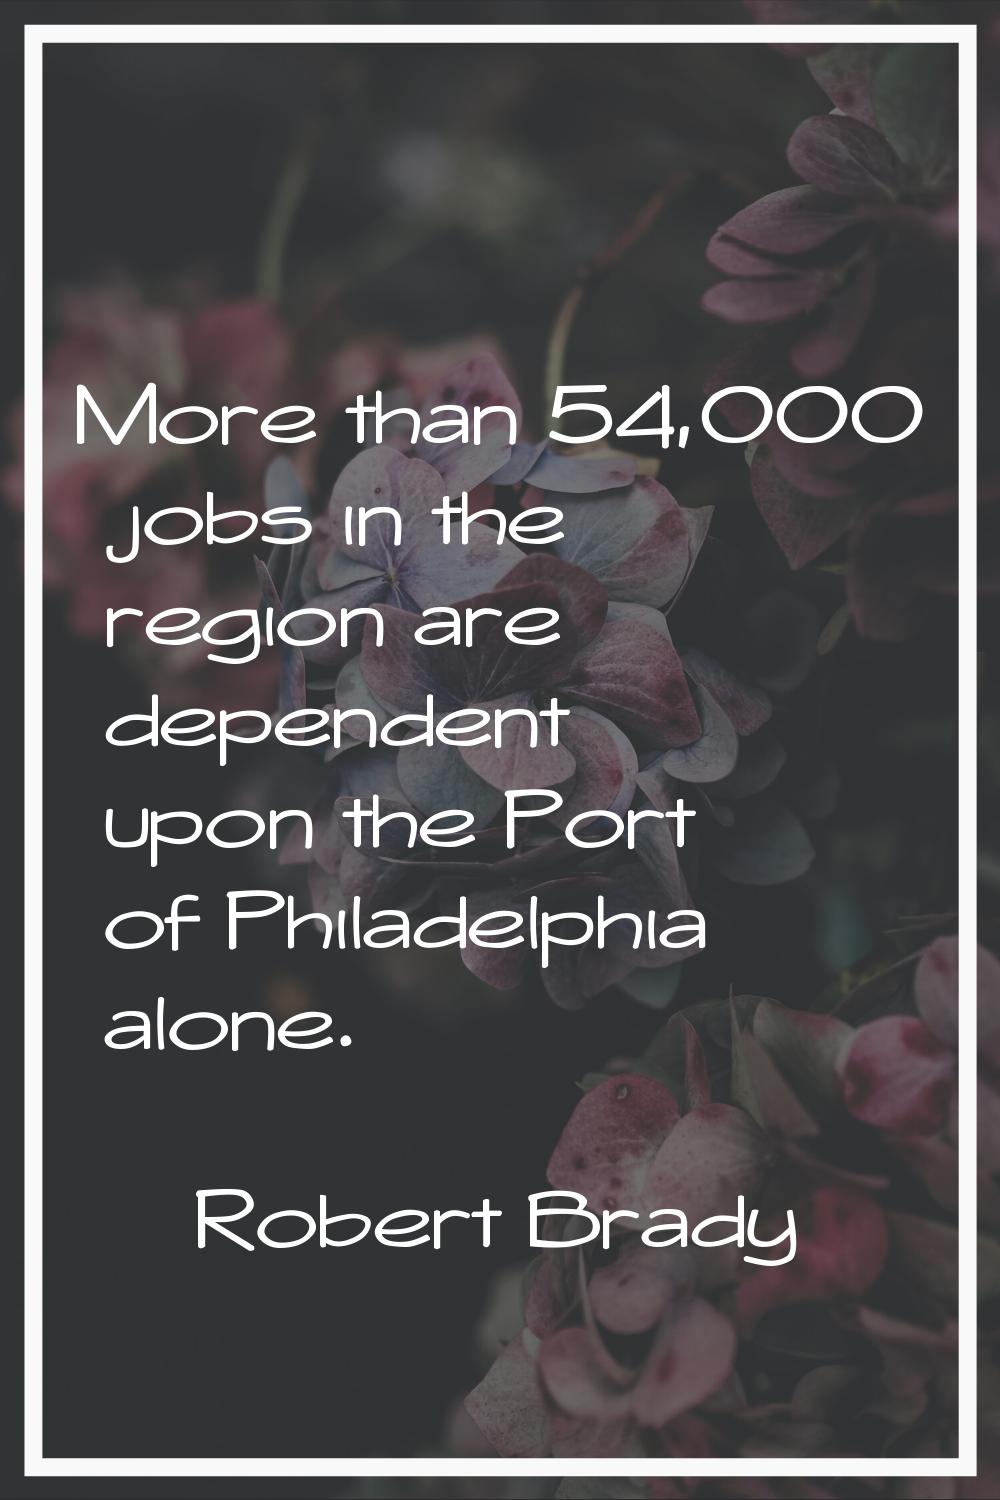 More than 54,000 jobs in the region are dependent upon the Port of Philadelphia alone.